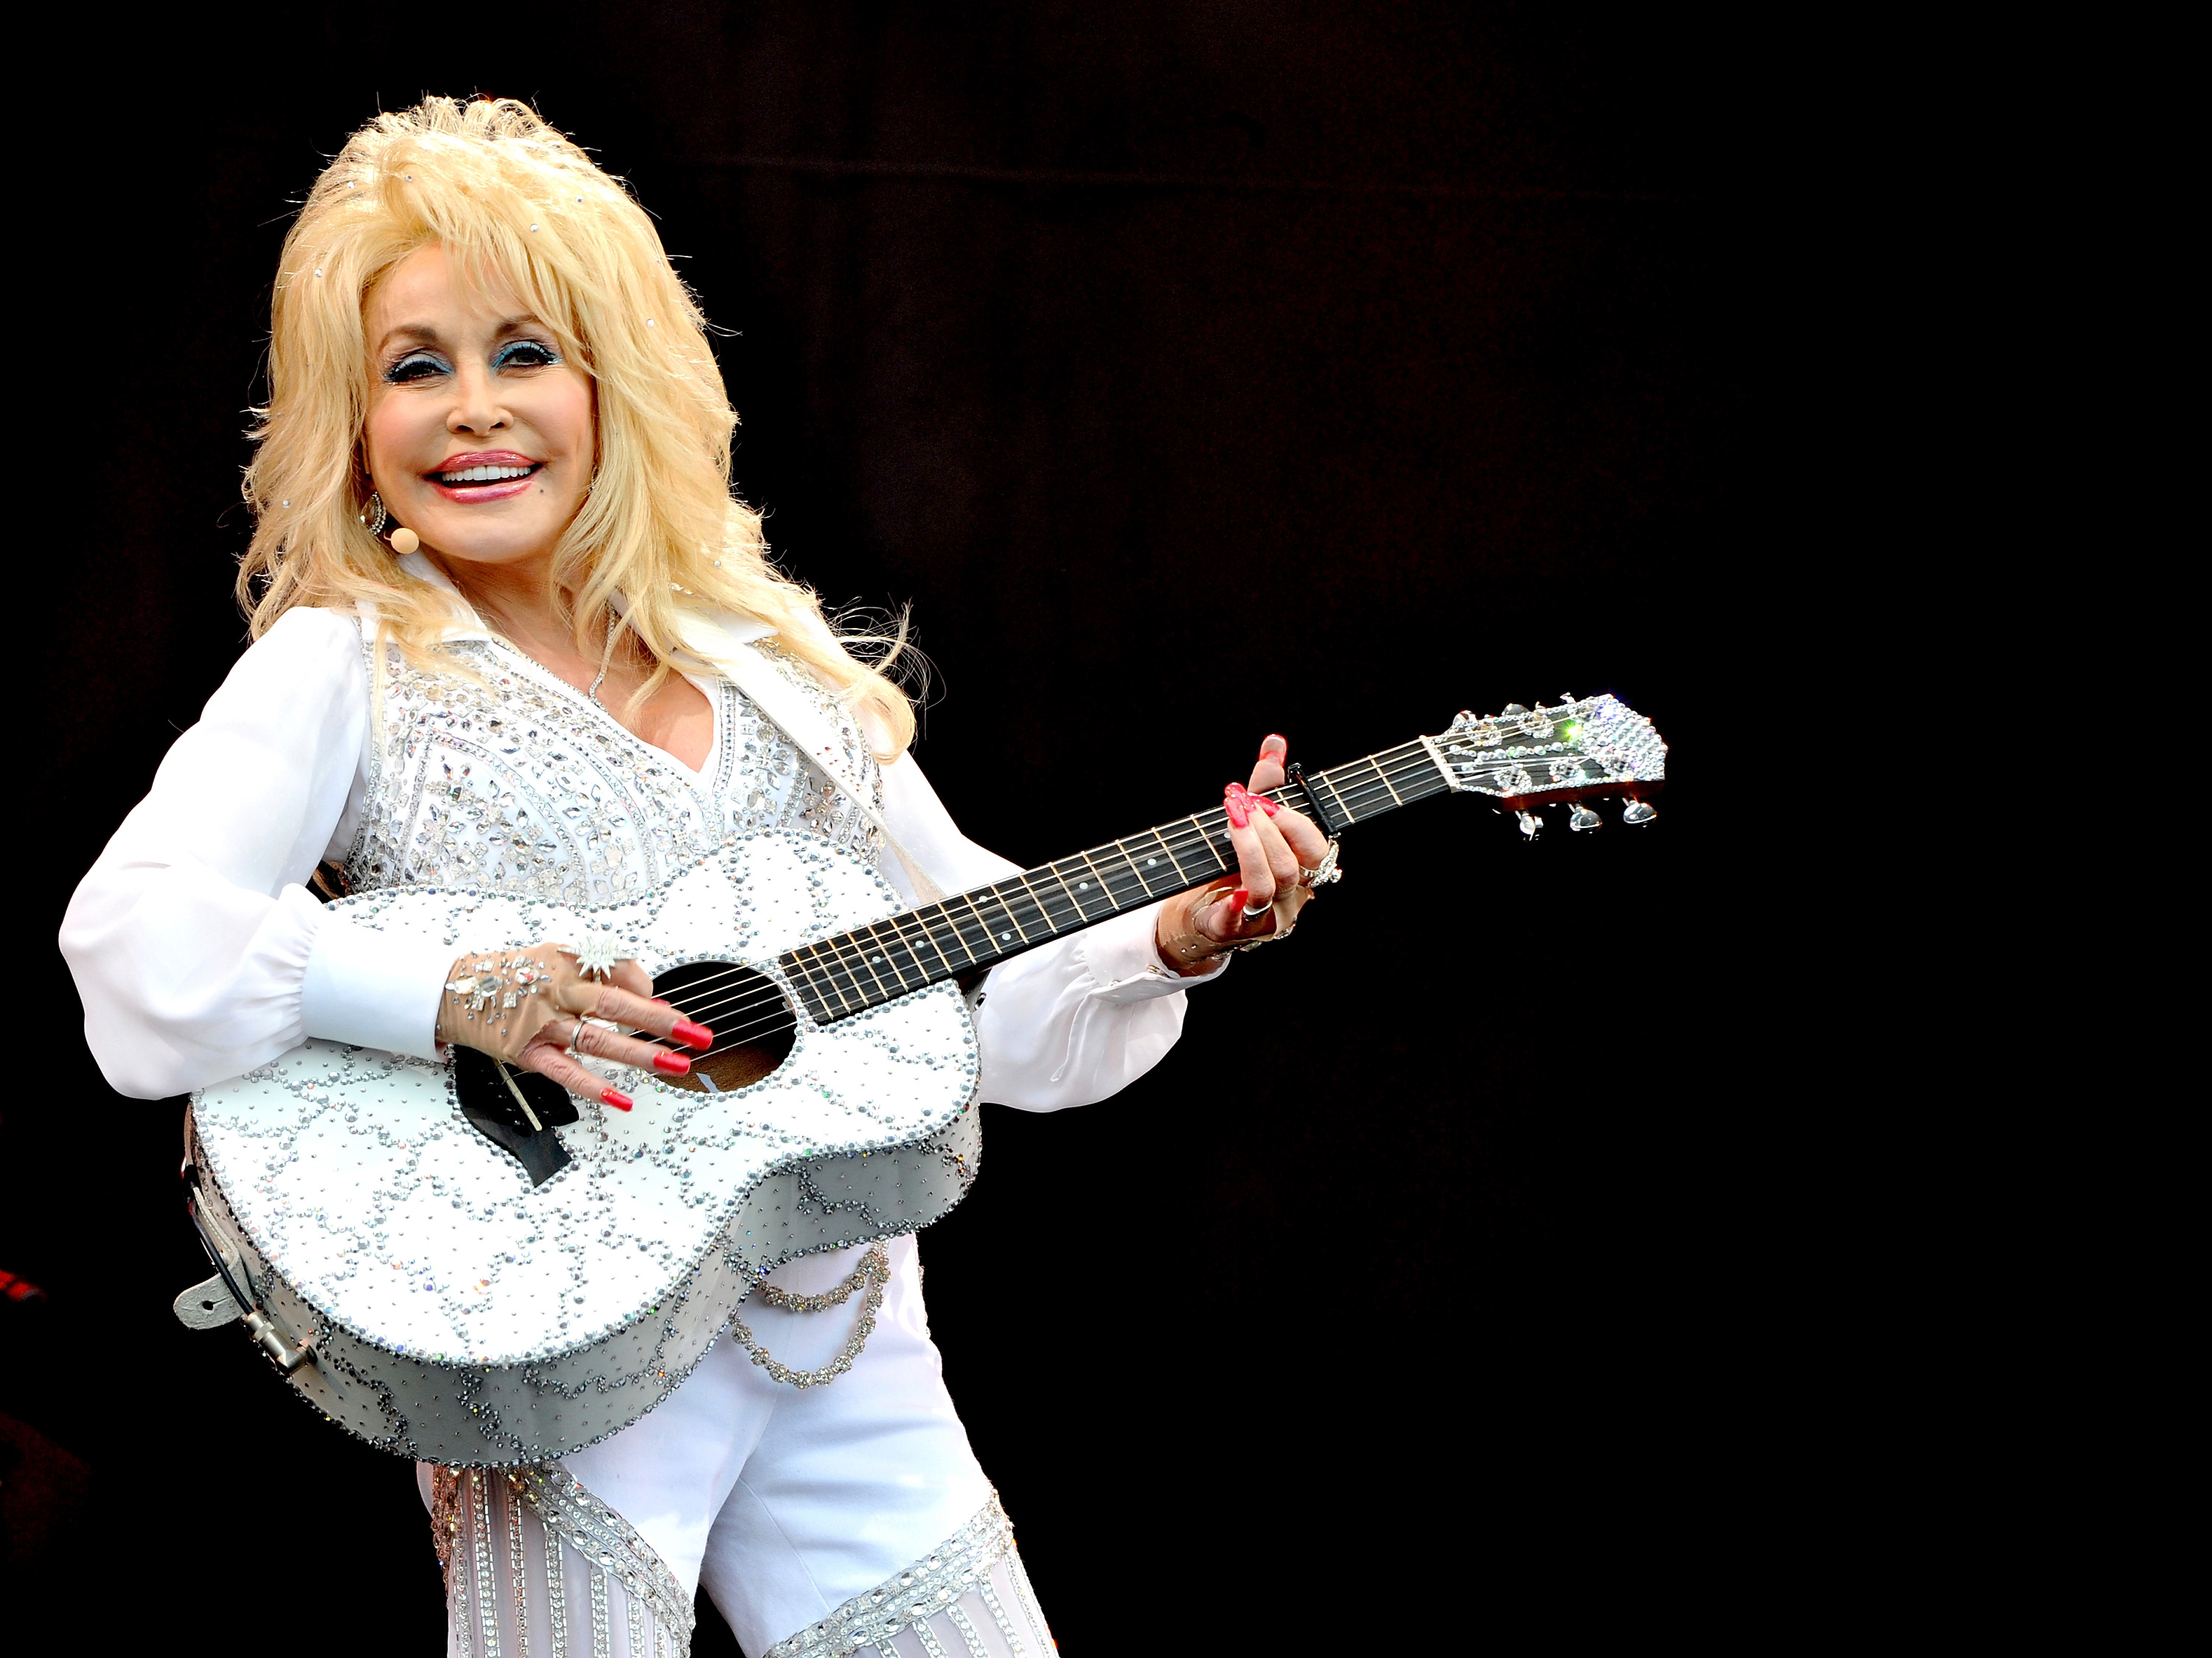 Dolly Parton wears a white outfit and plays a white, sequined guitar. Dolly Parton will release a baking mix in 2022.